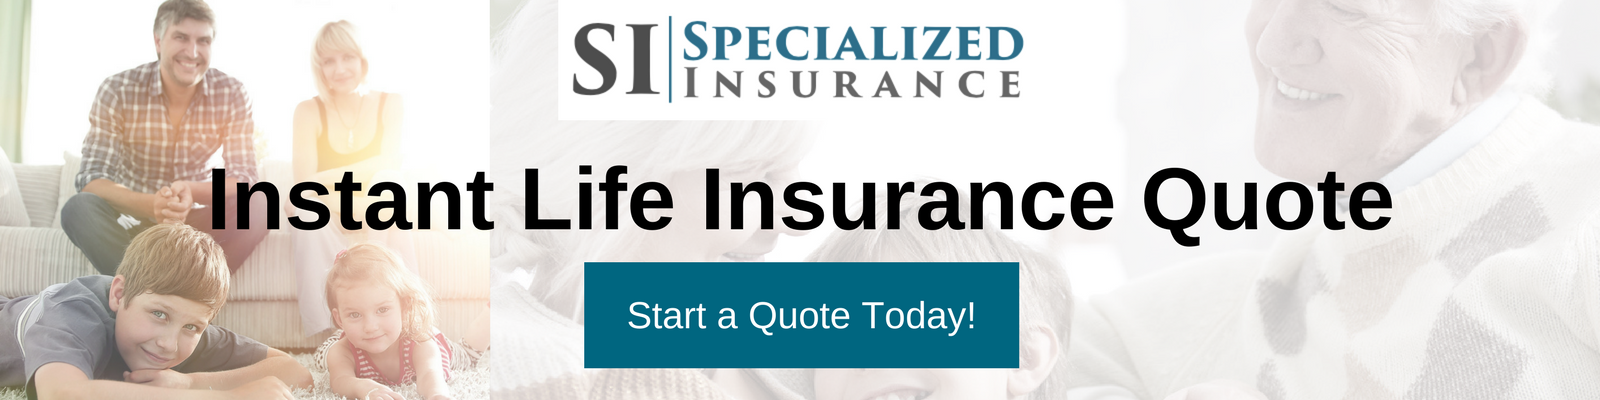 Instant Life Insurance Quote